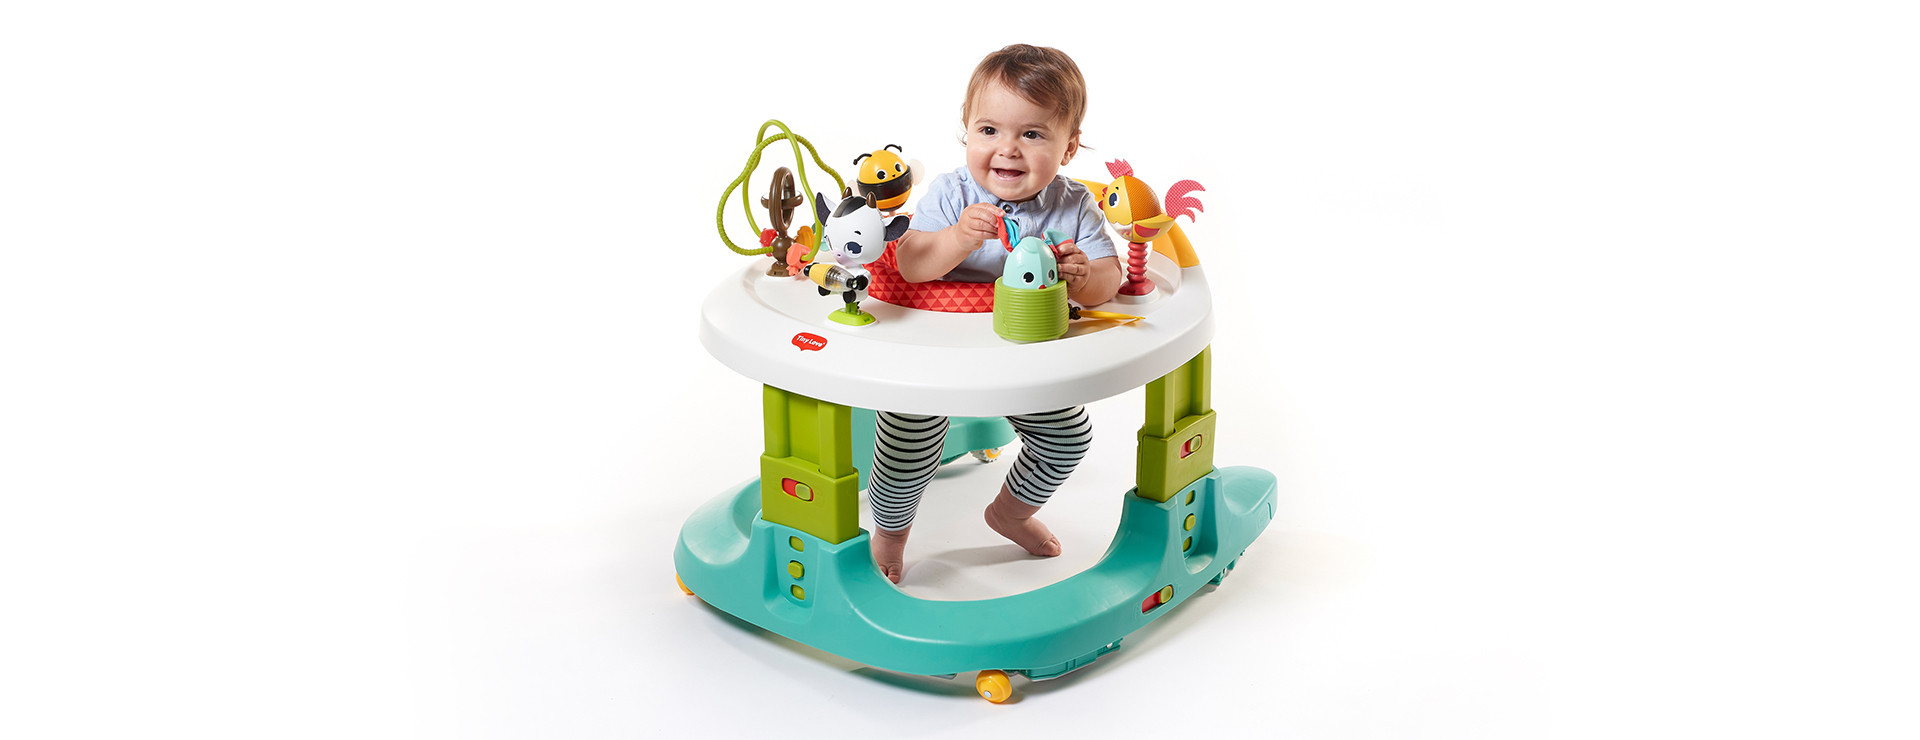 4-in-1 mobile activity center with multiple modes to grow with your baby